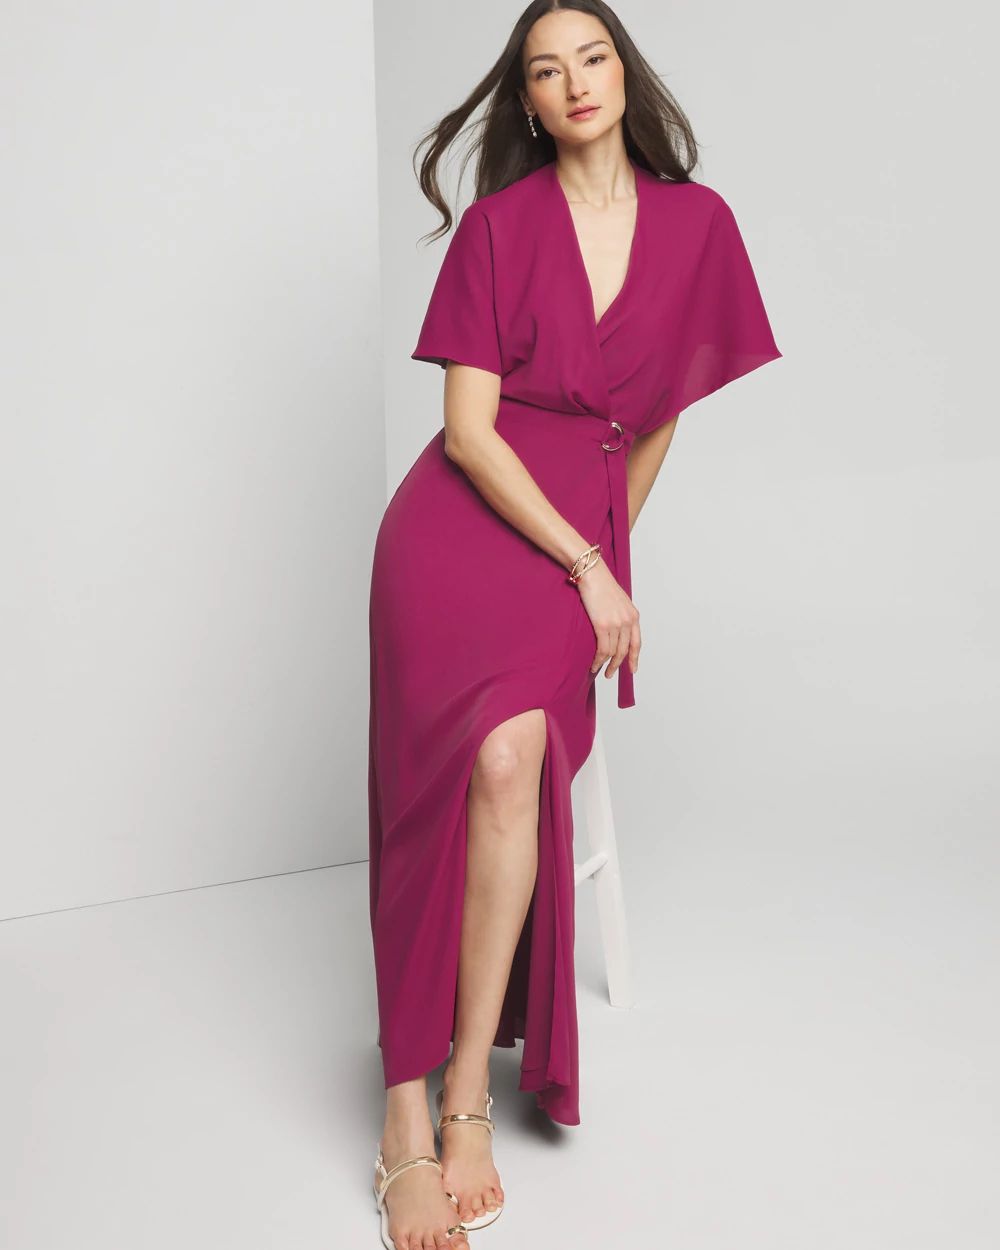 Petite Cape Belted Maxi With Slit Dress click to view larger image.